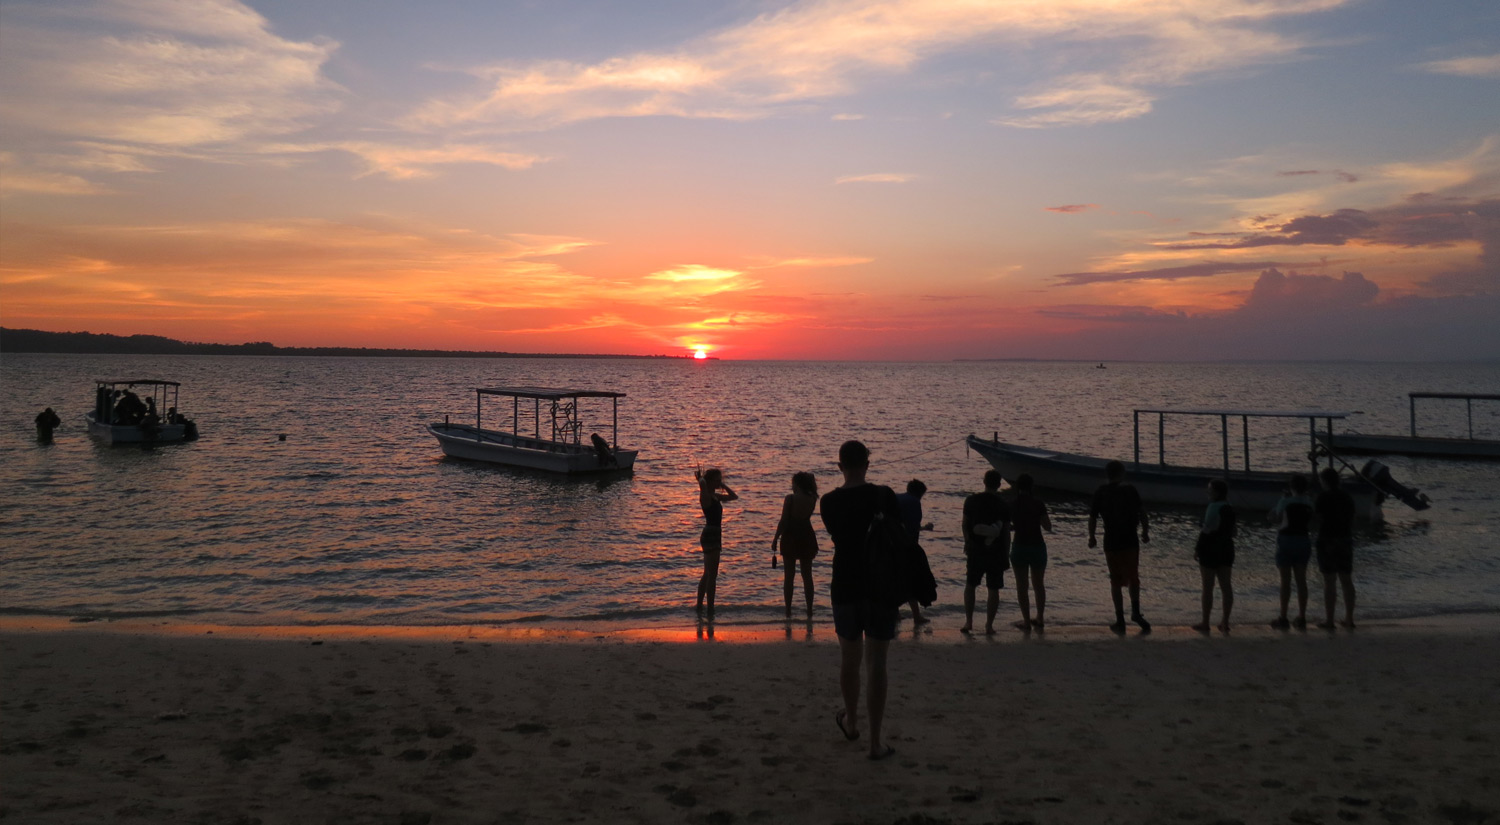 Sunset on Hoga Island, location for our Indonesia marine biology field trip.